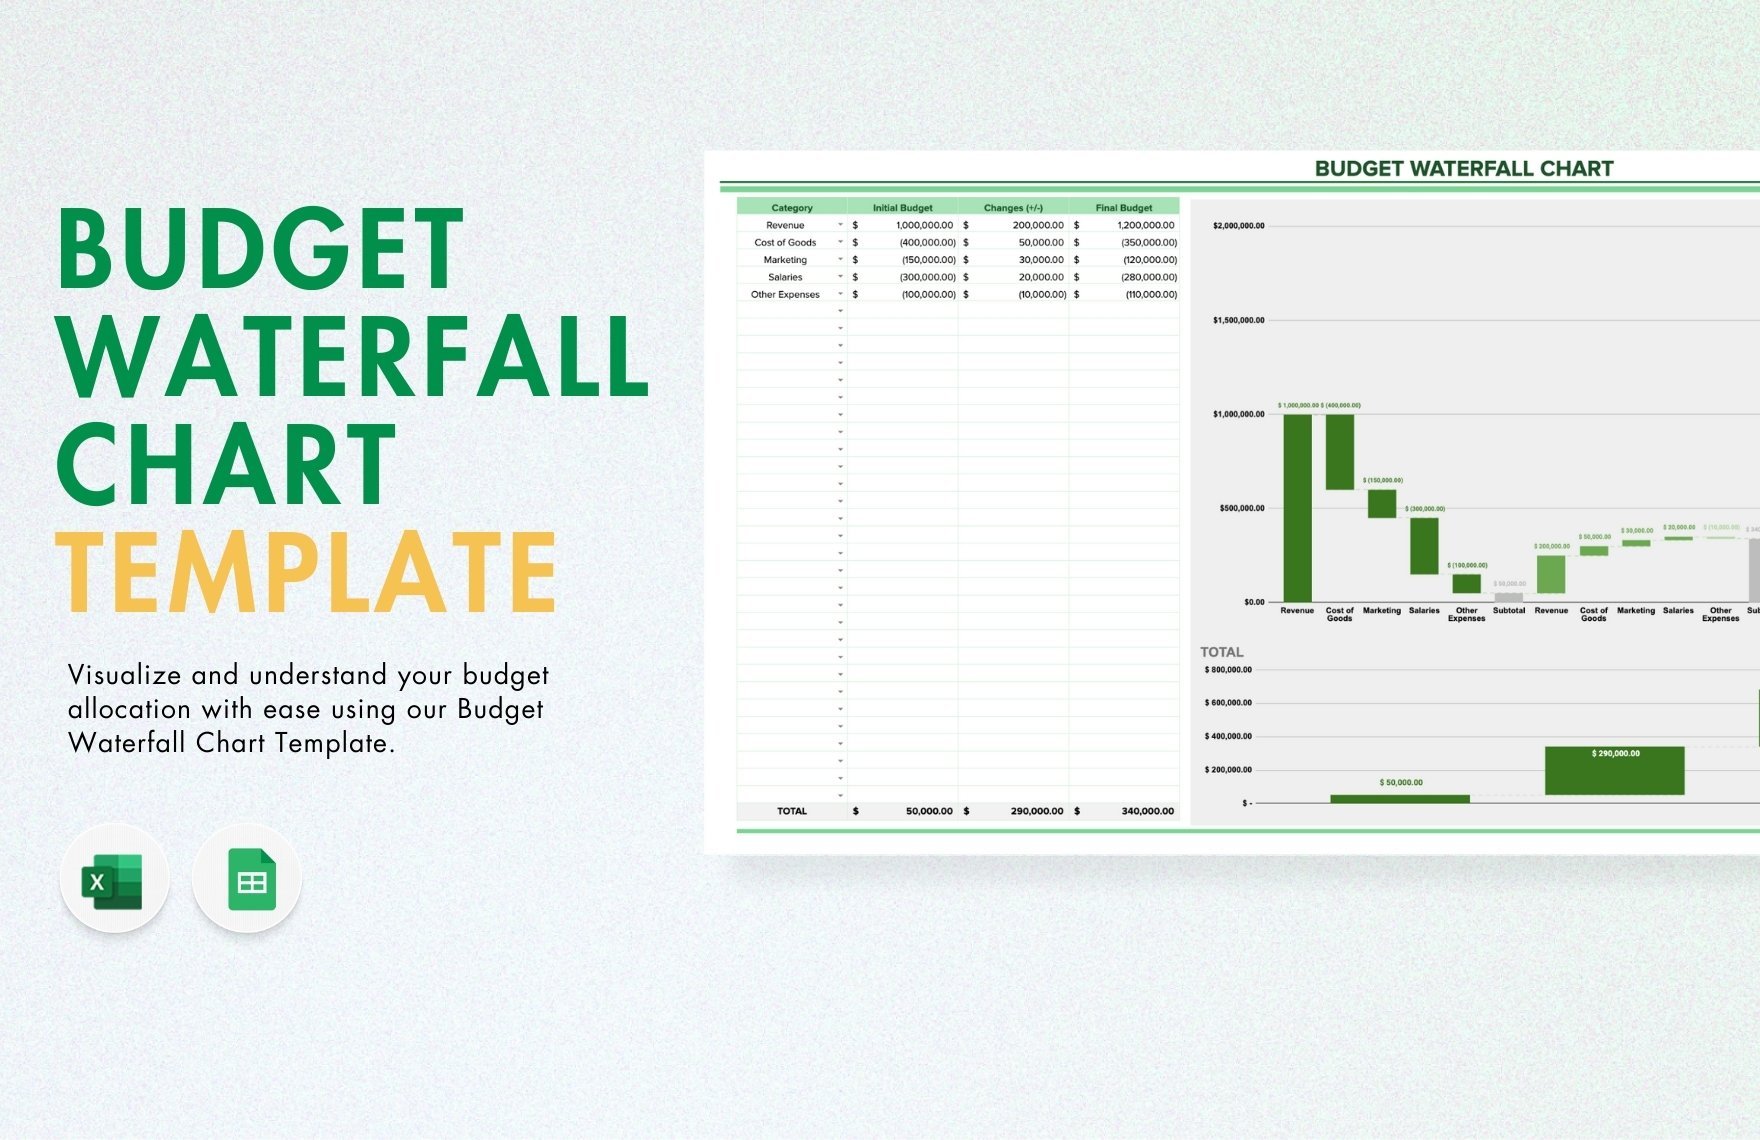 Budget Waterfall Chart Template in Excel, Google Sheets